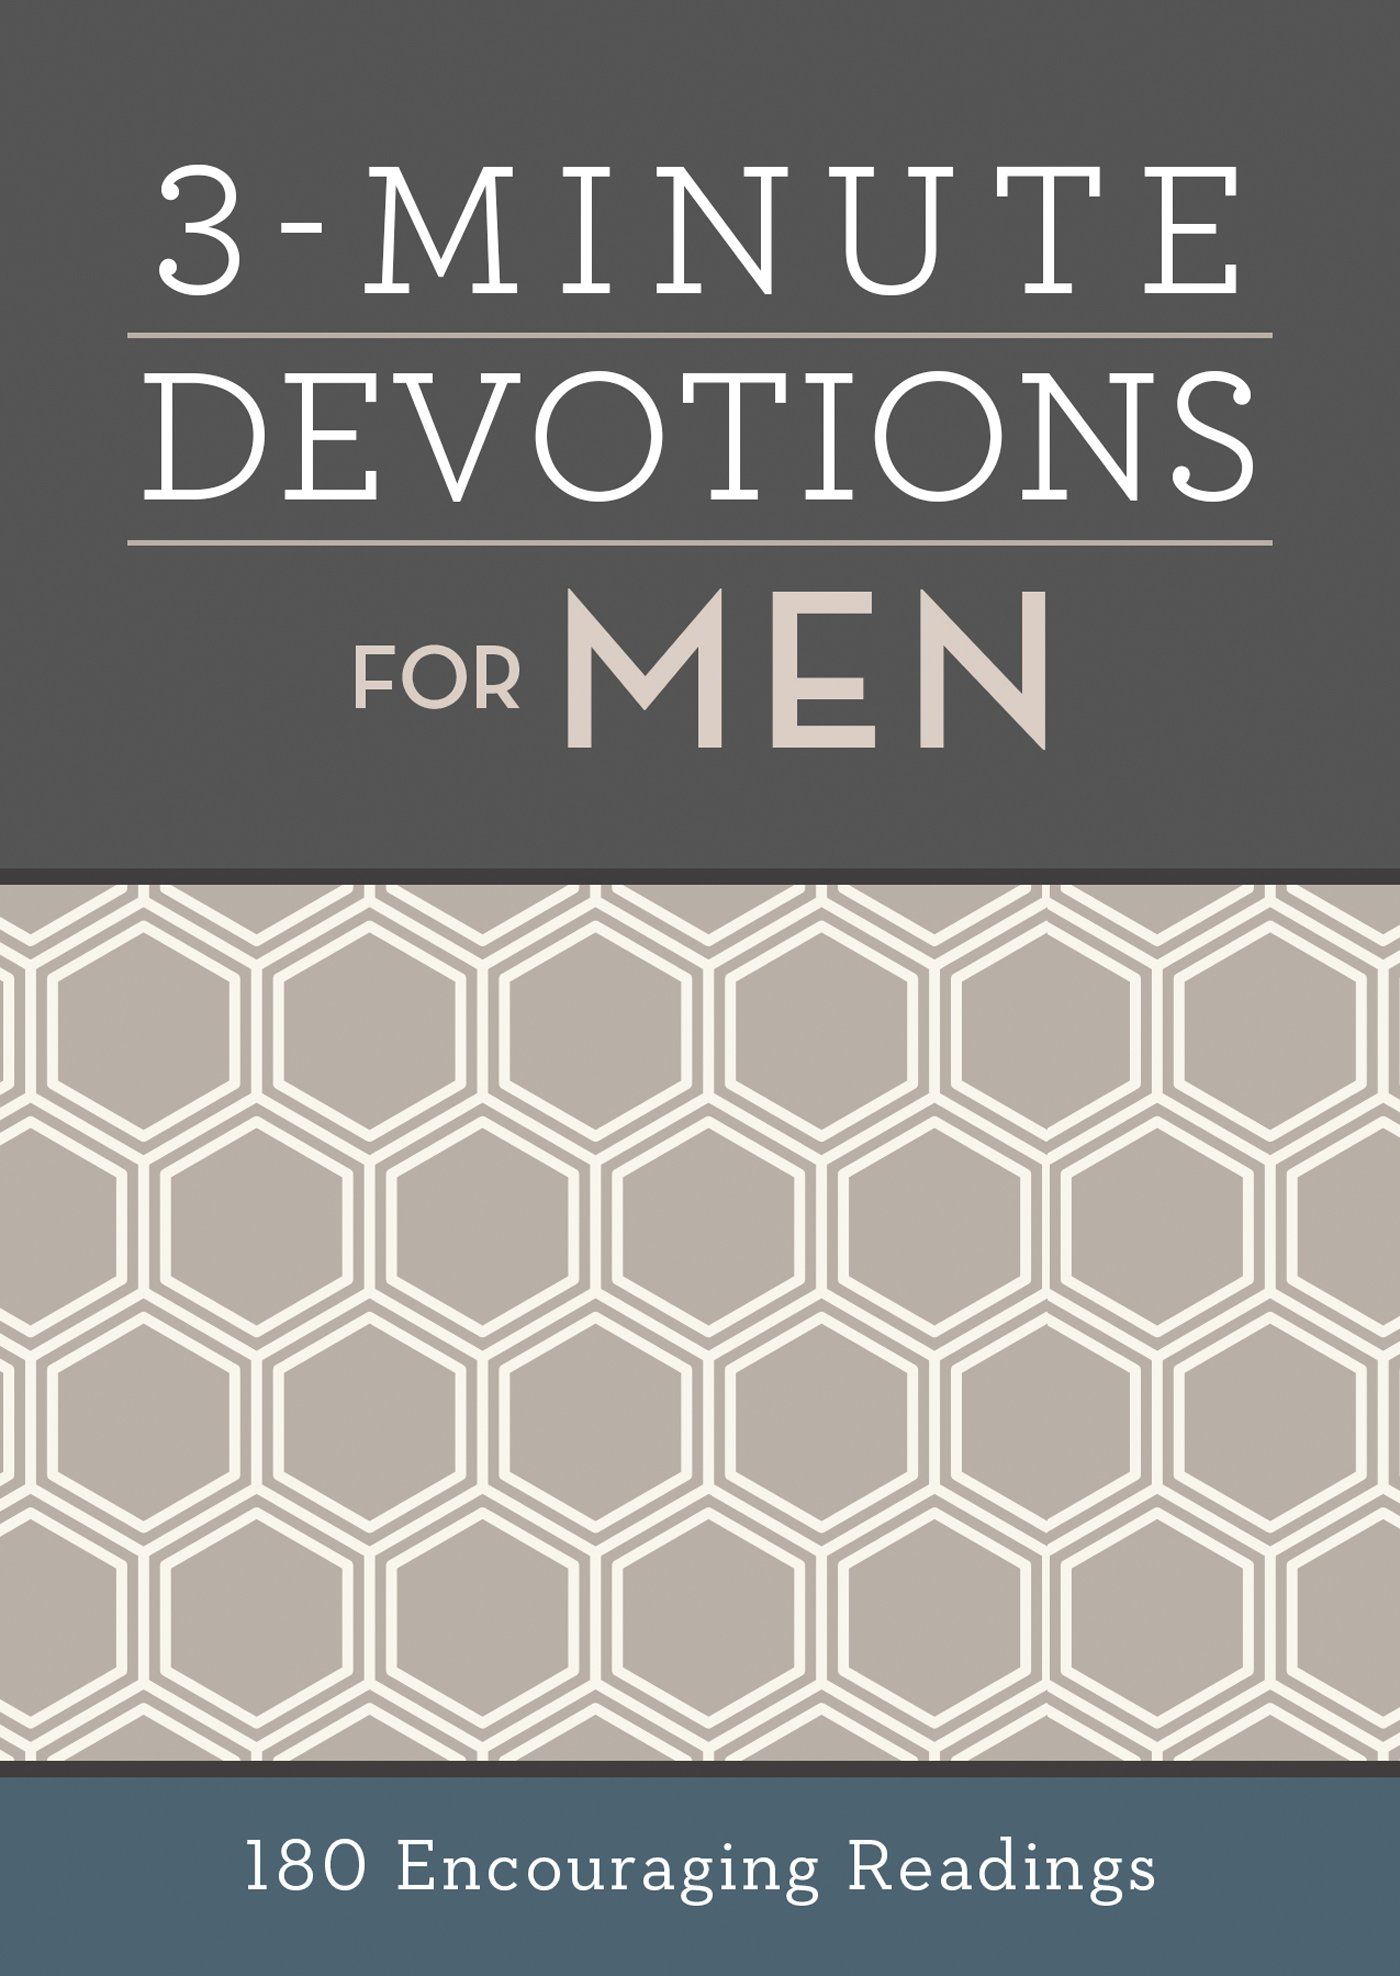 3-Minute Devotions for Men: 180 Encouraging Readings: Compiled by Barbour Staff: 9781683222507: A... | Amazon (US)